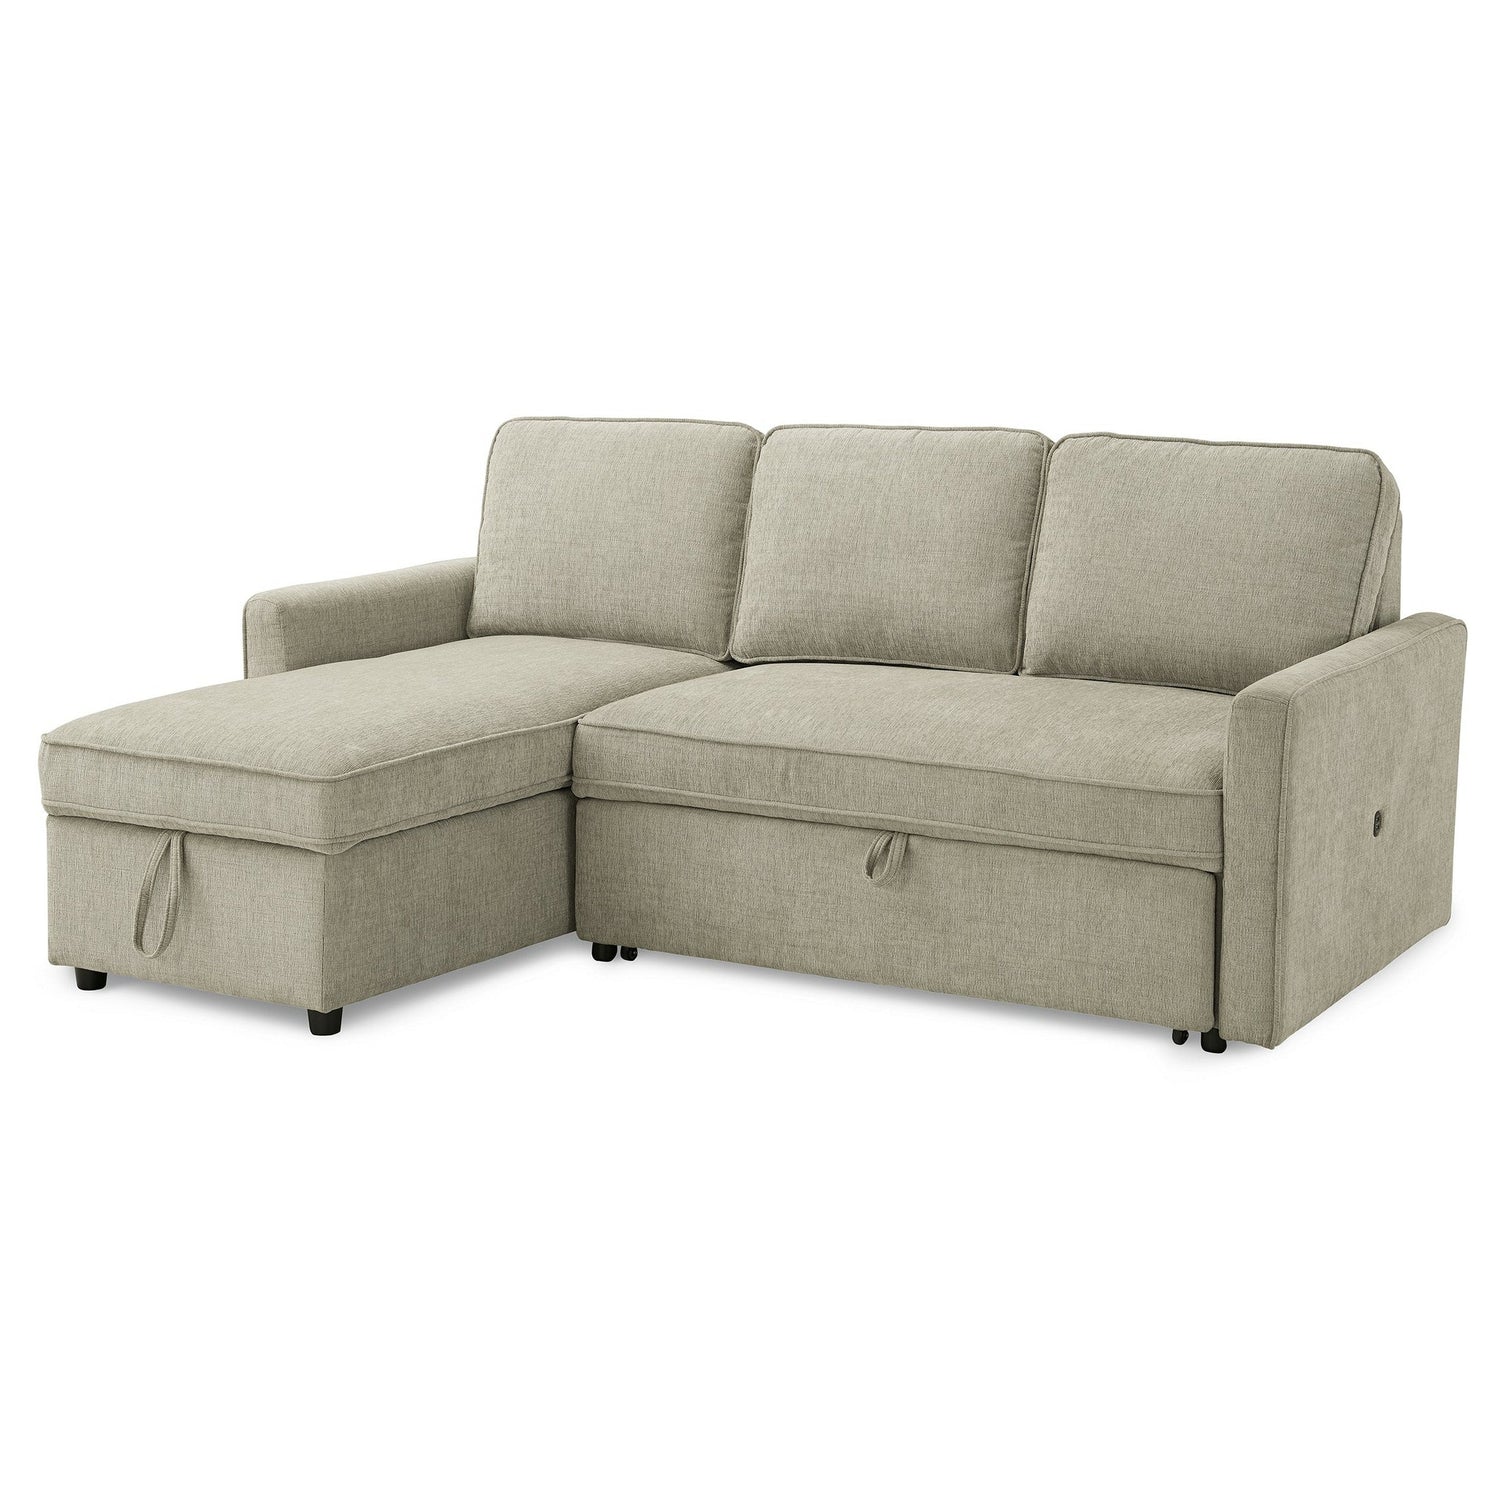 Kerle 2-Piece Sectional with Pop Up Bed Ash-26504S1